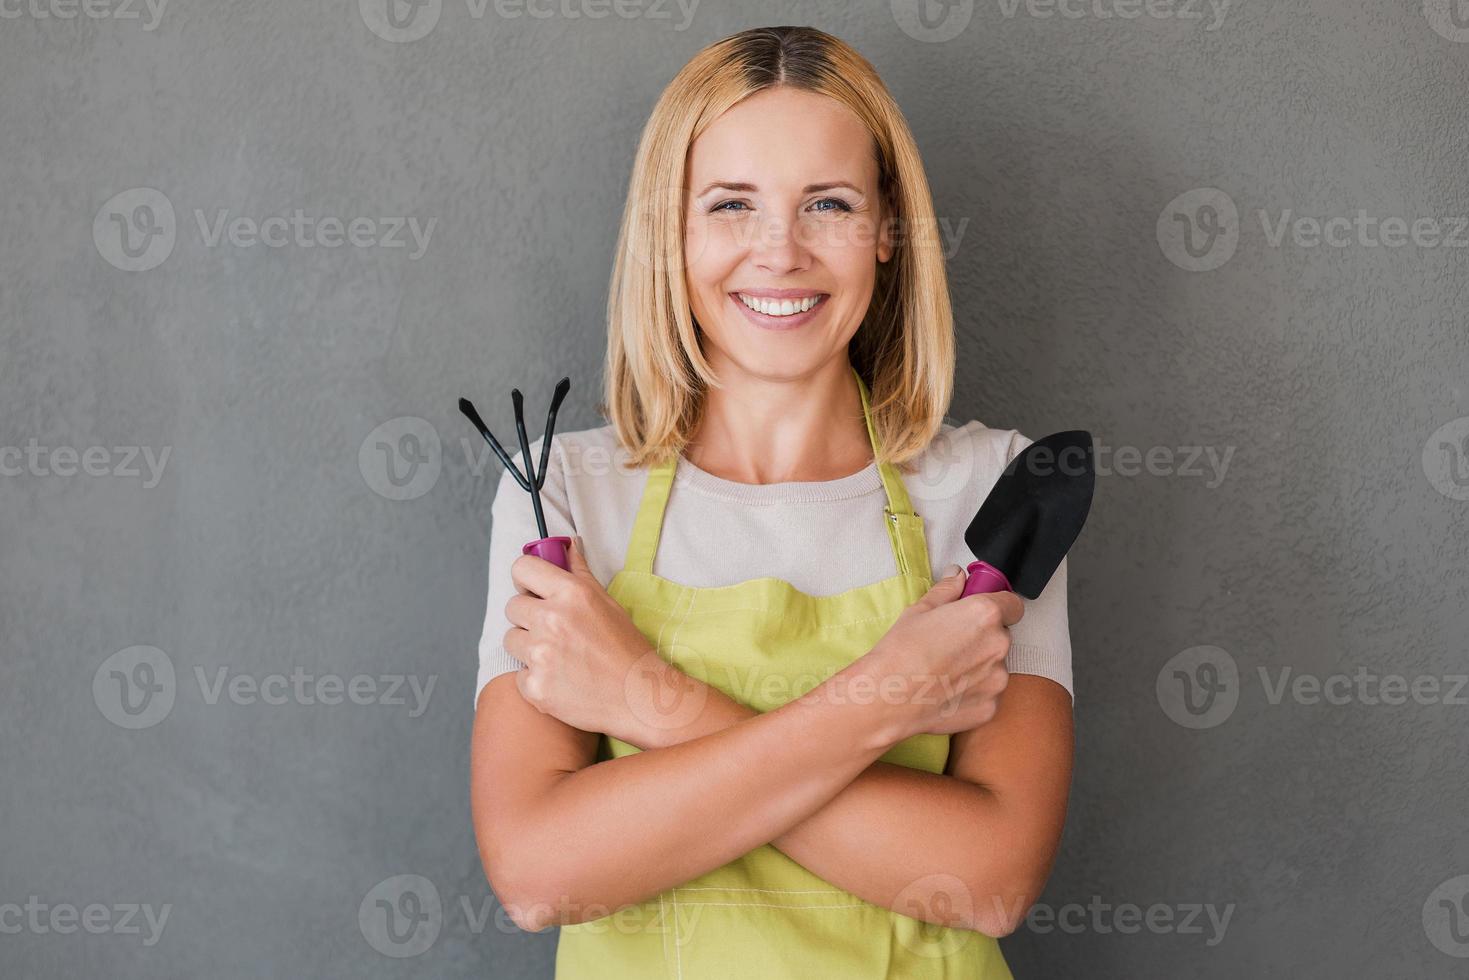 Ready for gardening. Happy mature woman in green apron holding gardening equipment and smiling while standing against grey background photo